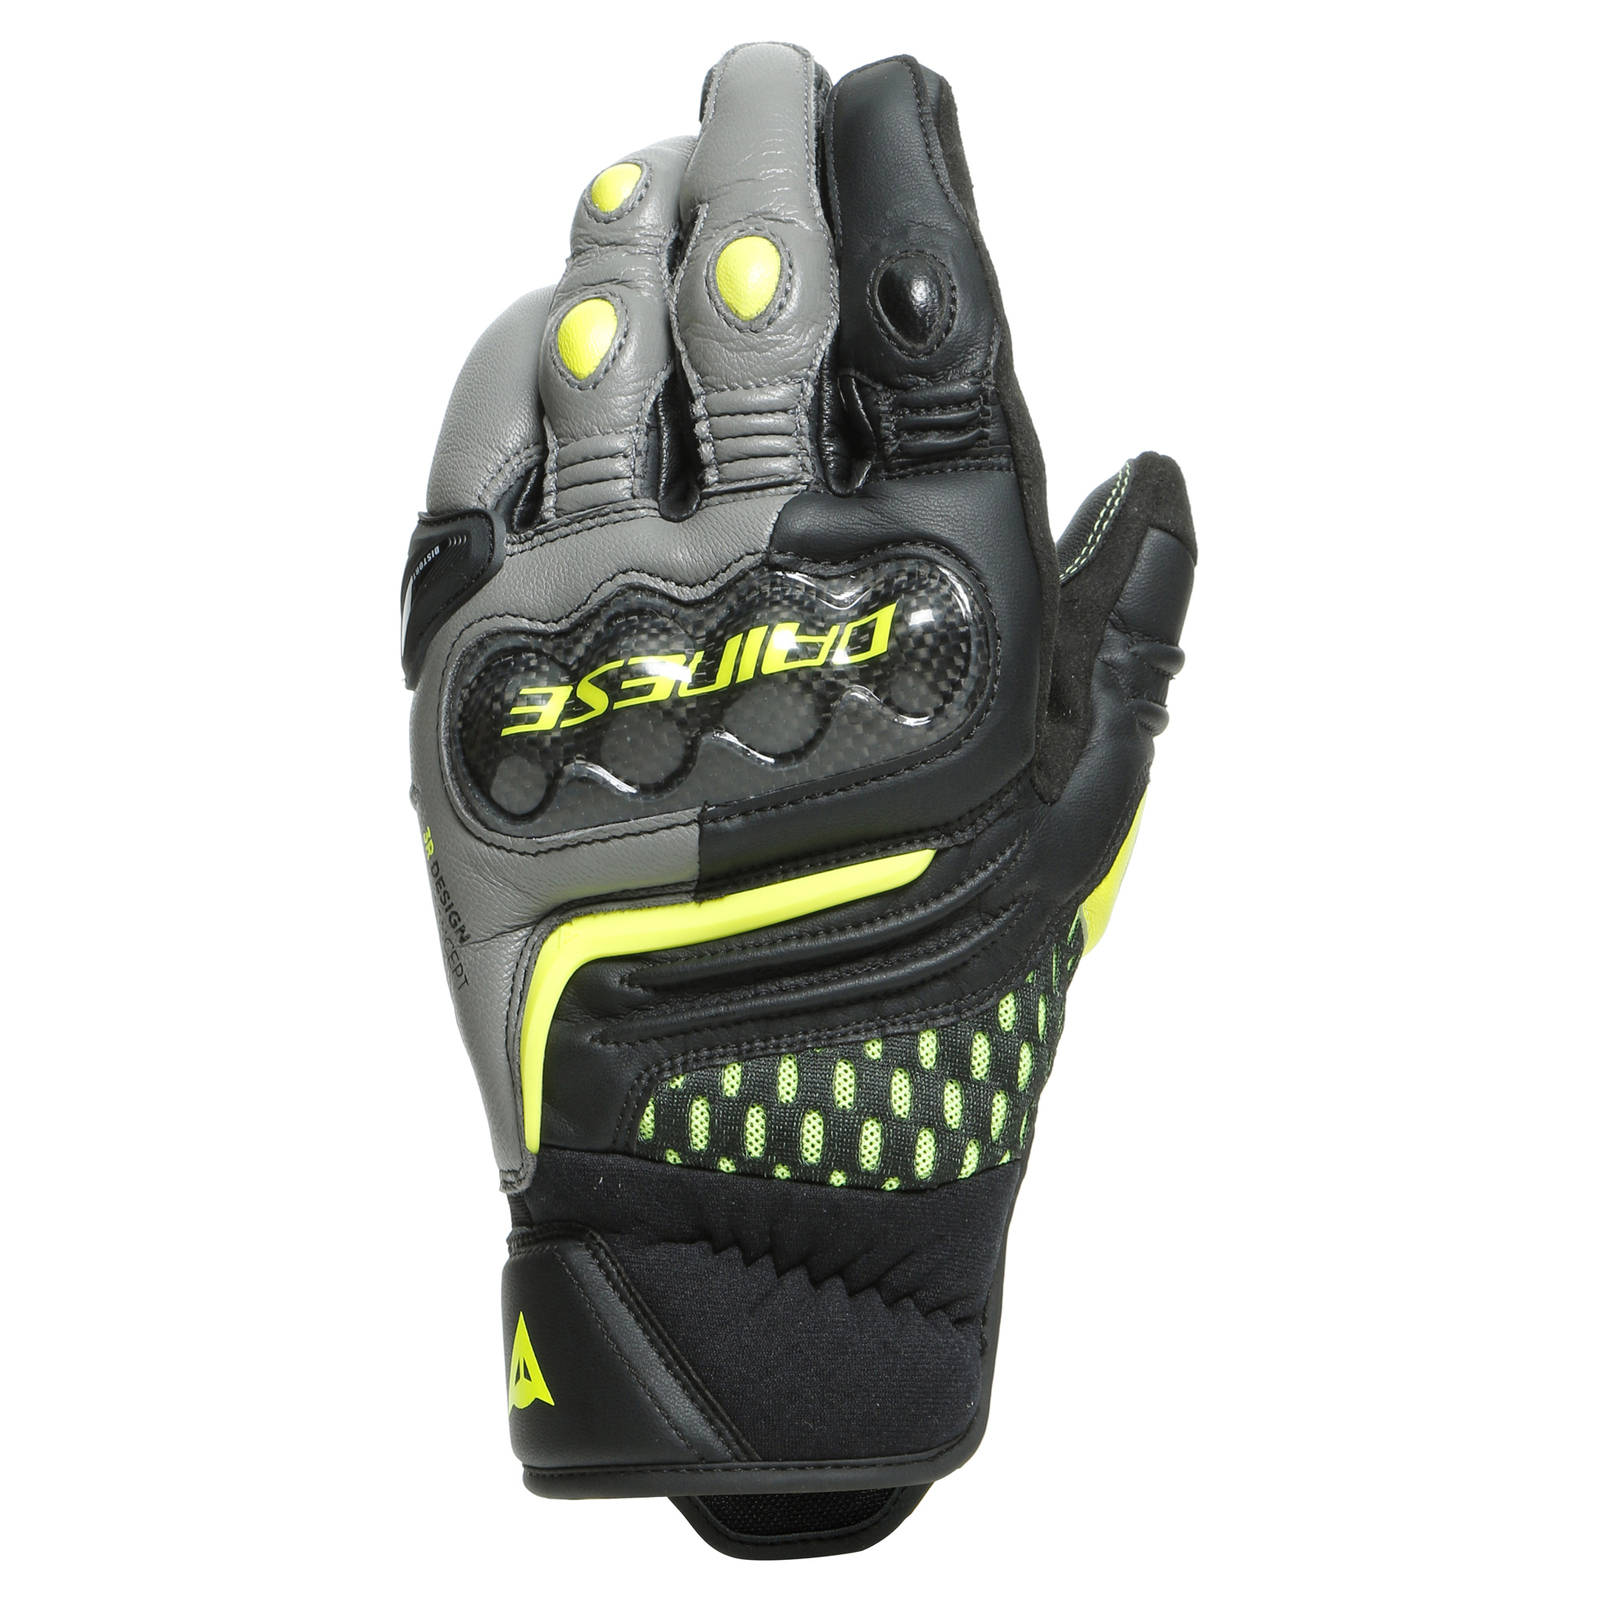 CARBON 3 SHORT GLOVES - BLK/CHAR-GRY/FLUO-YEL - XXL